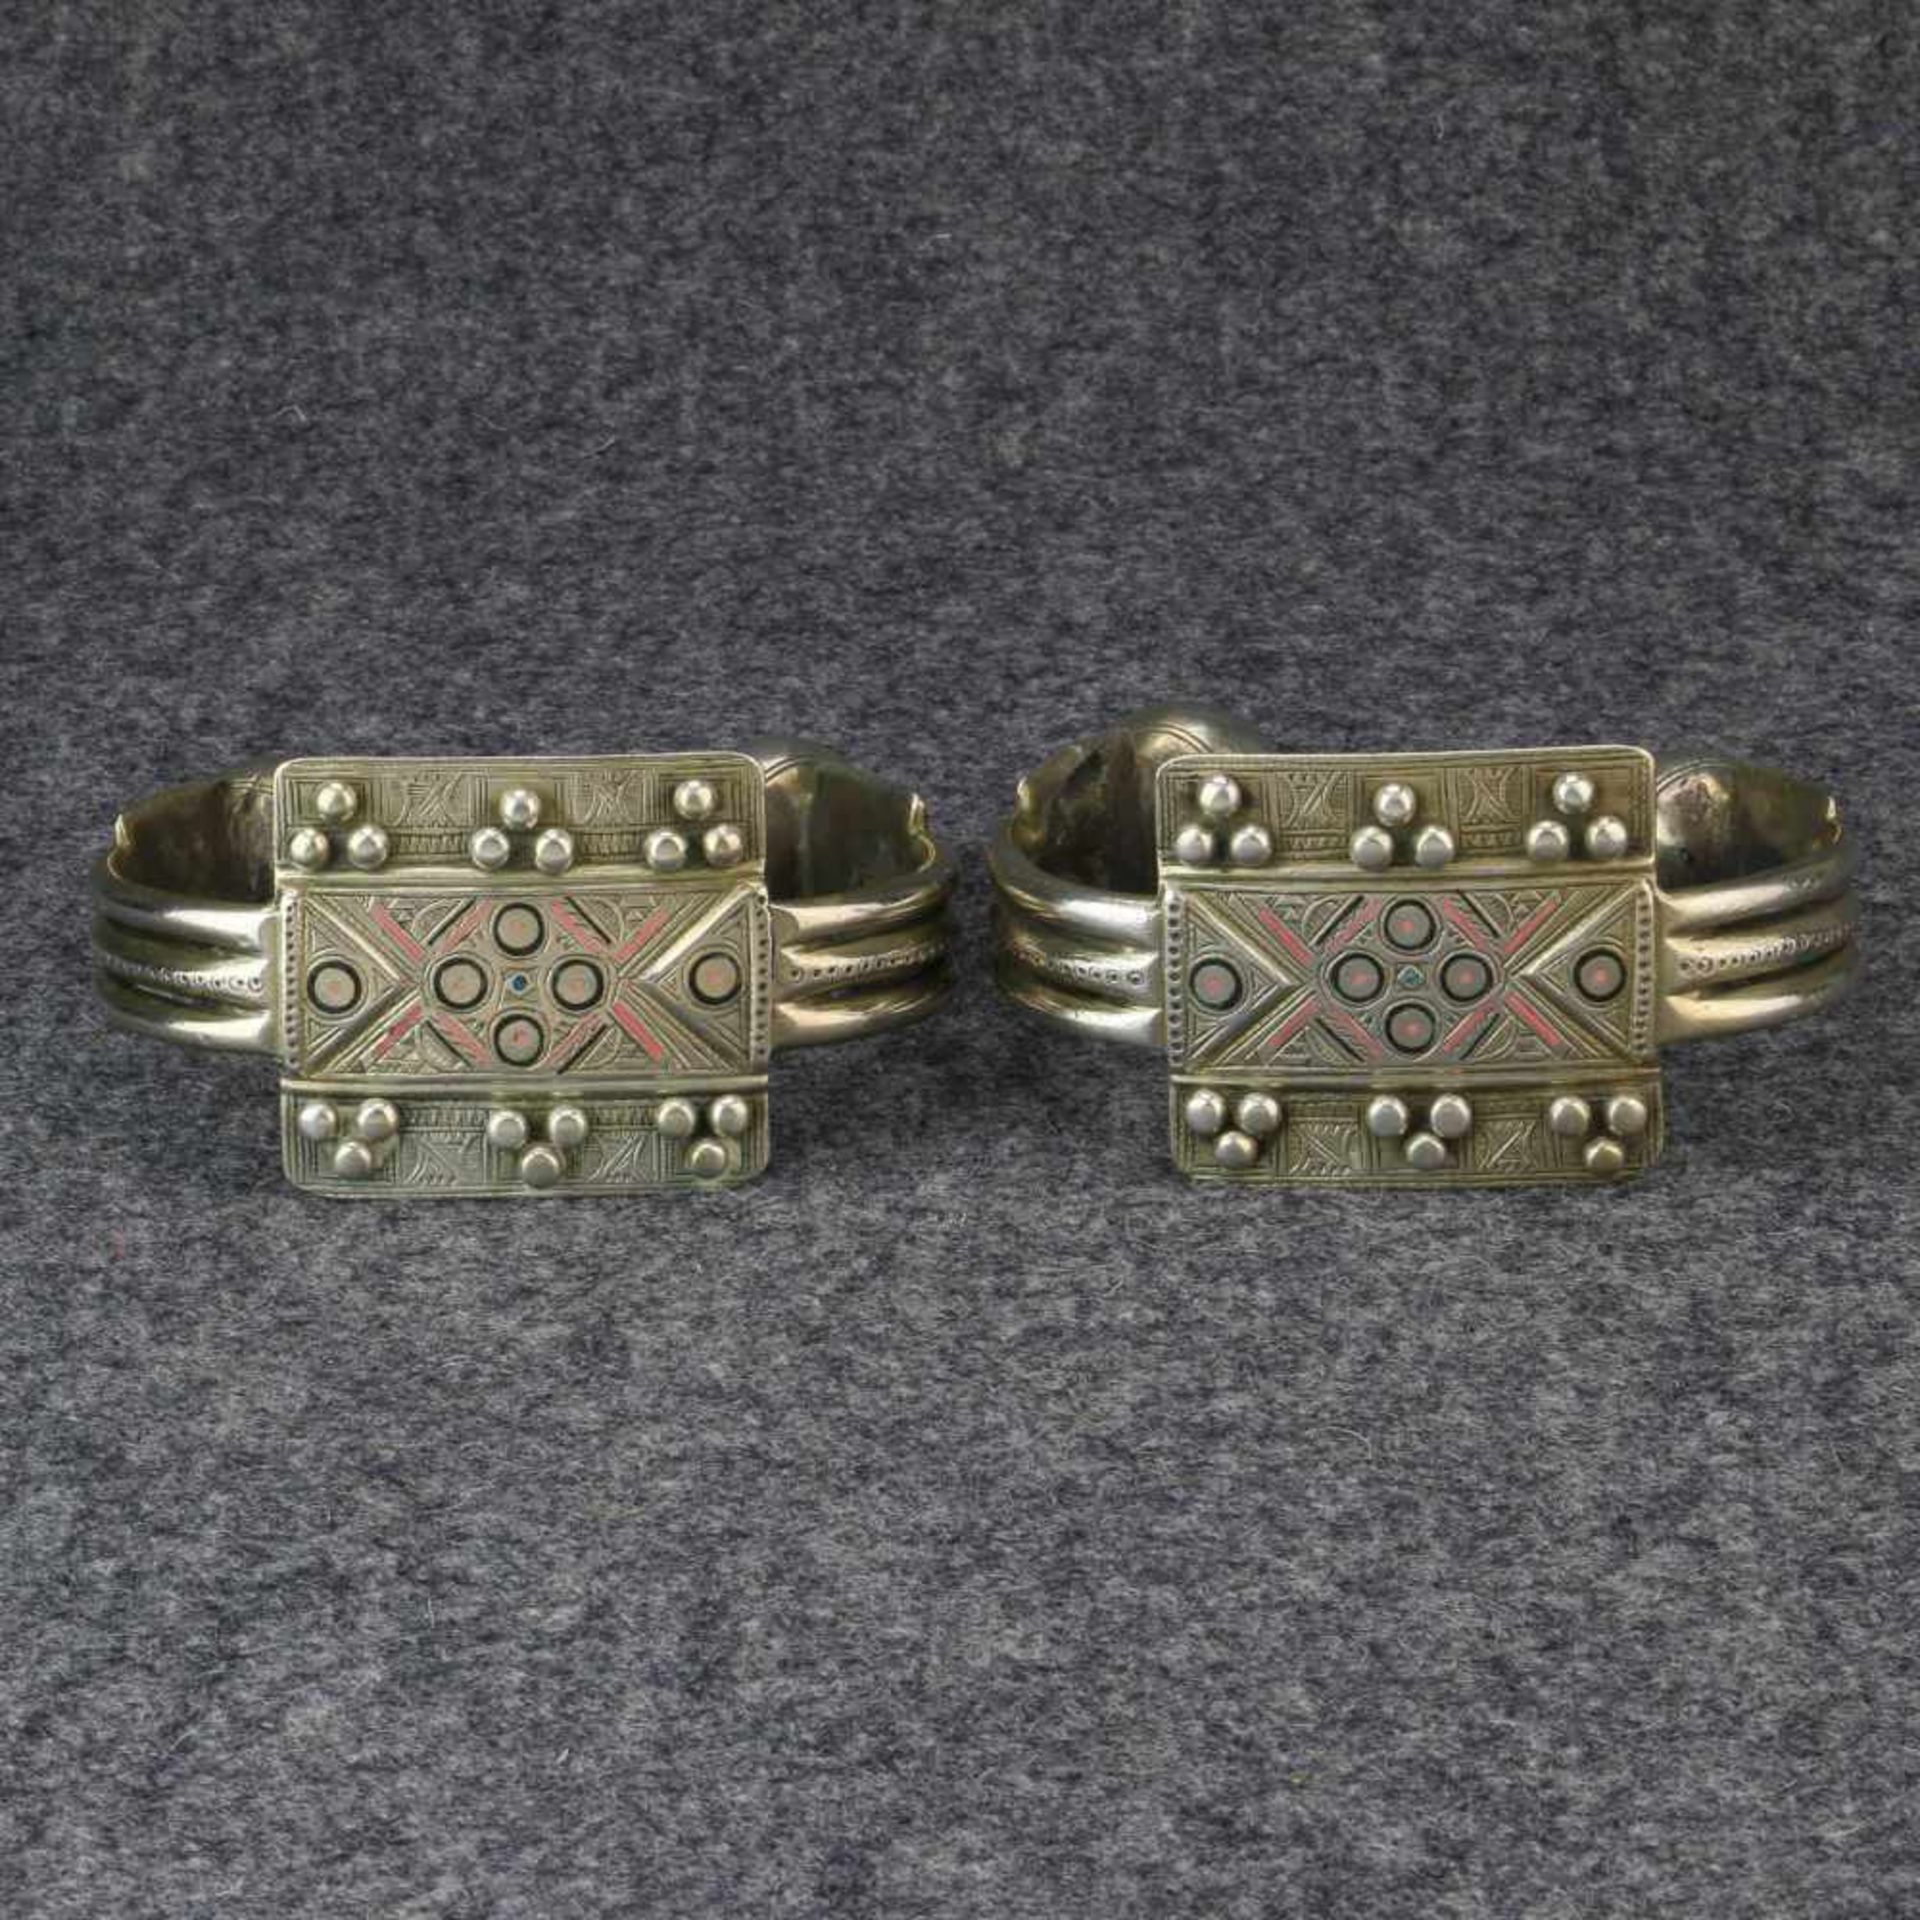 Mauritania, pair of silver anklets, 'Khelkhal',with decoration of enamel in geometrical shapes and